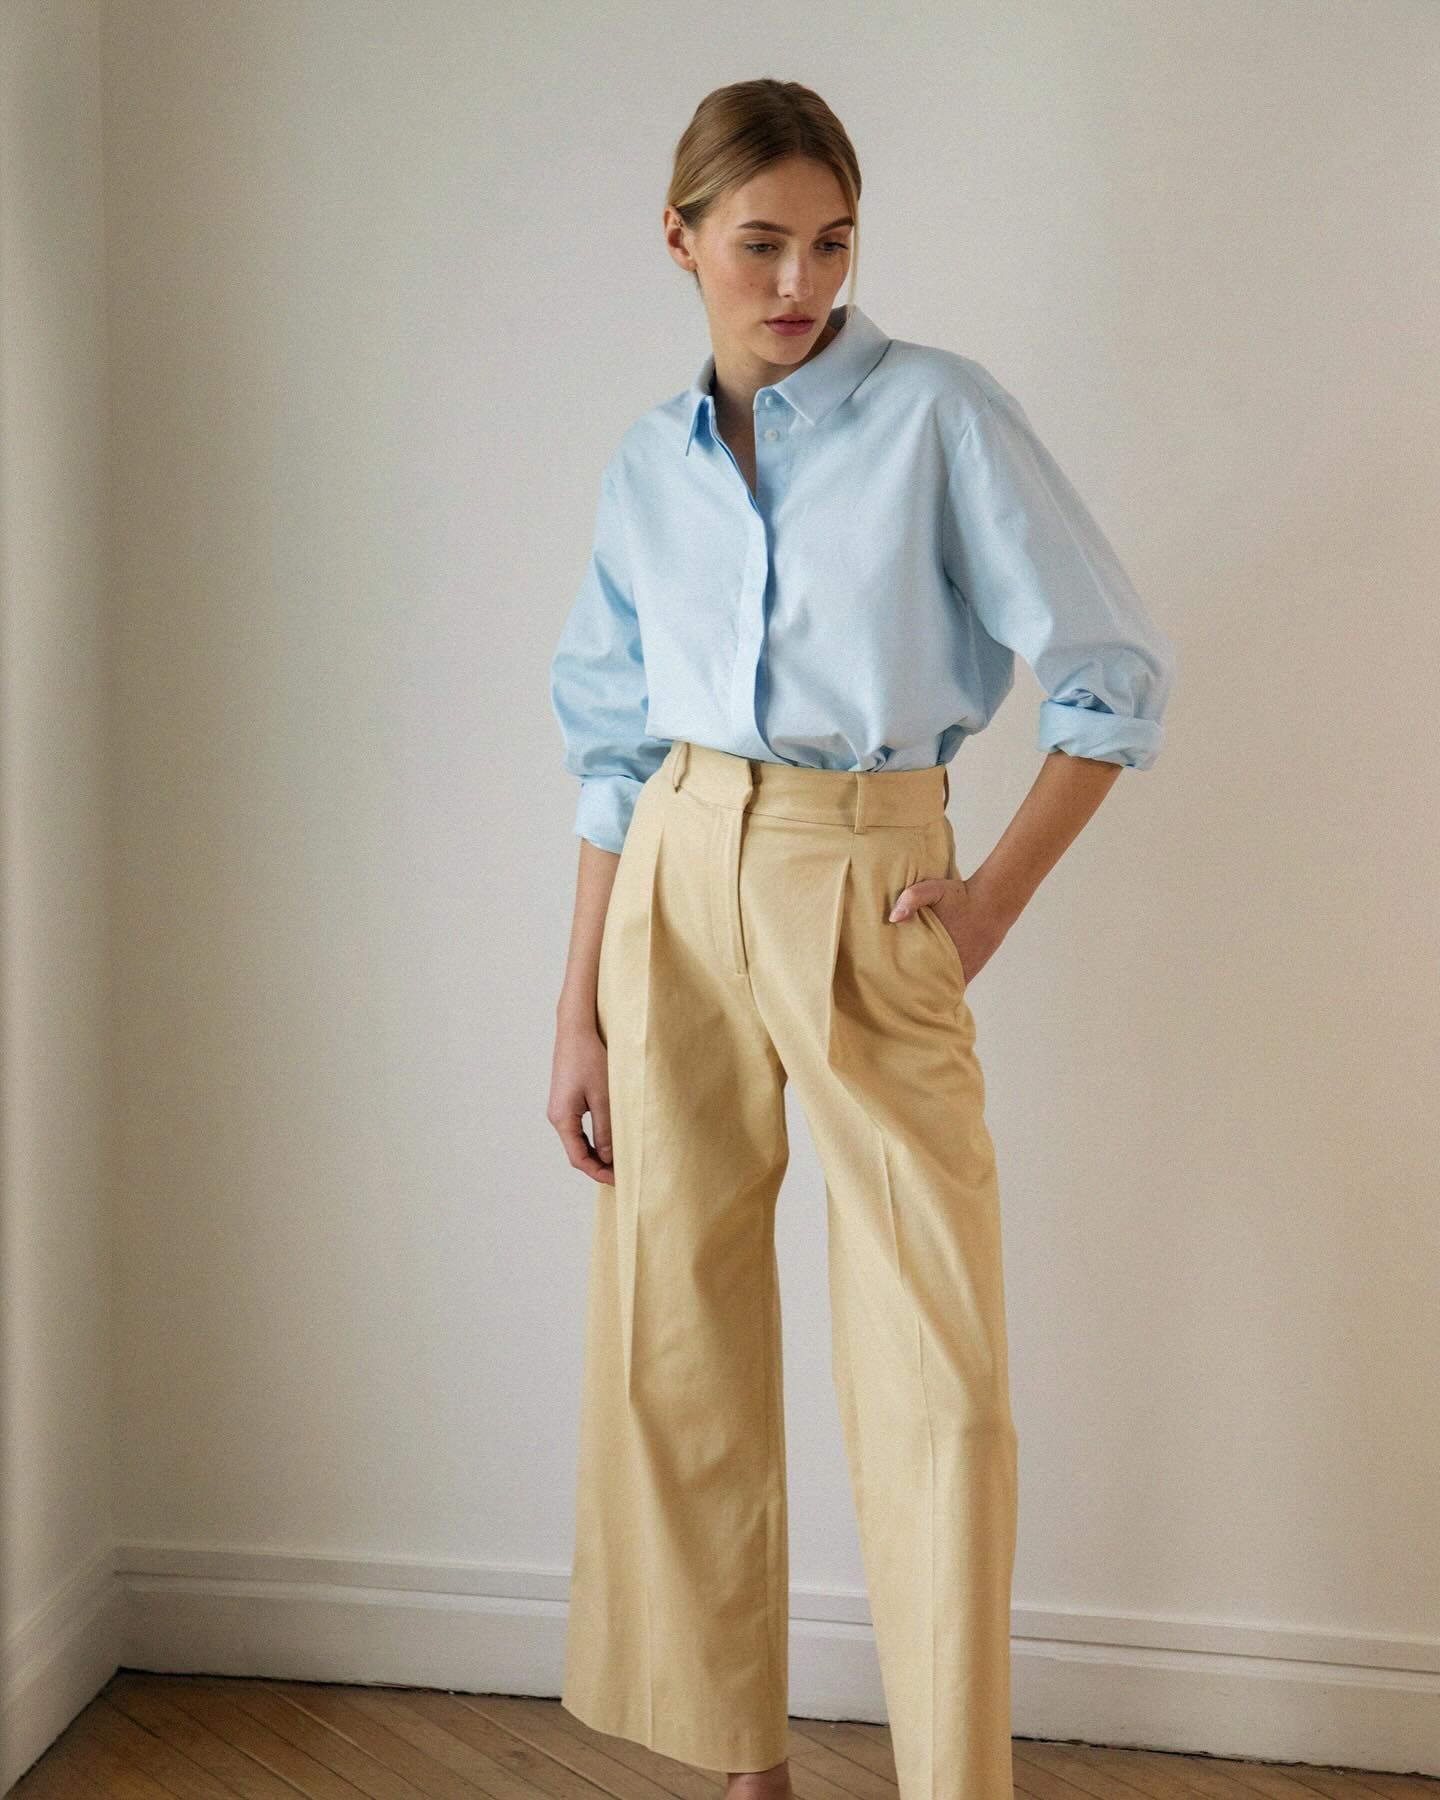 LE TIAGO
Your Beige Pants

Perfectly tailored, timeless and yet so cool, Le Tiago pants are your new must-have to elevate your outfit. High-waisted, slightly wide legged, artfully pleated and made of the dreamiest fabrics, Le Tiago pants are so versa